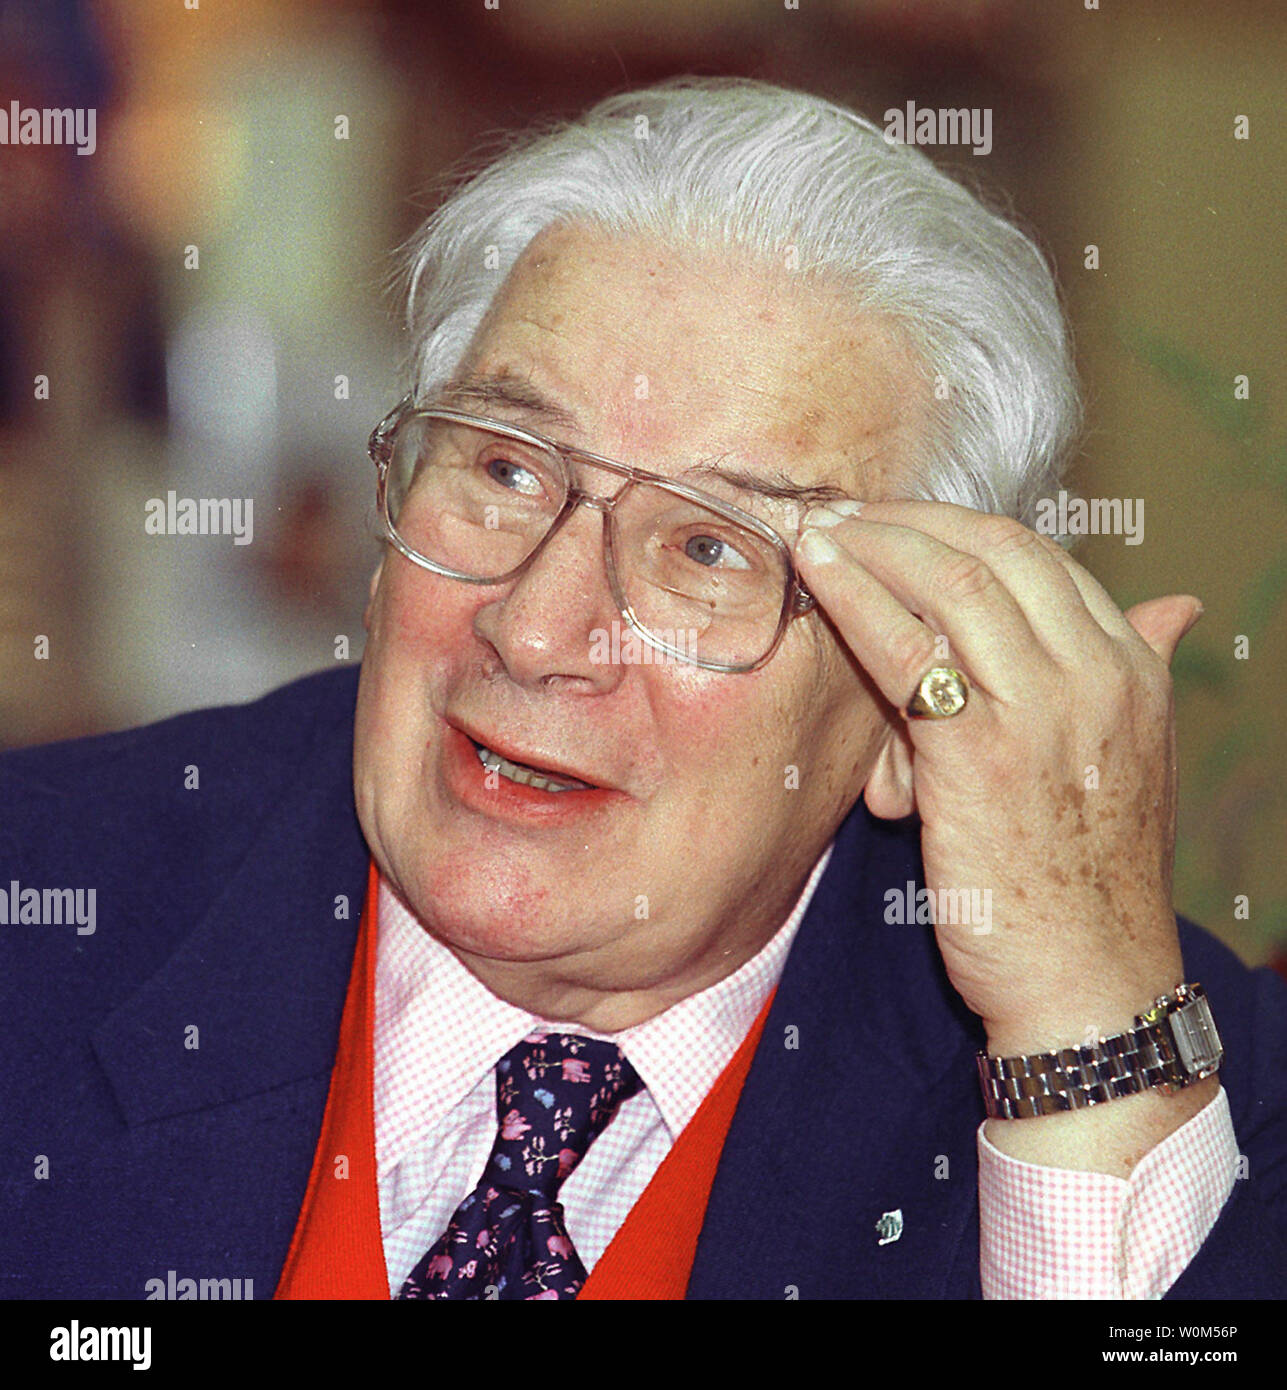 Oscar-winning British actor and playwright Peter Ustinov has died at the age of 82. He is pictured at a signing for his book 'The Quotable Ustinov' on October 12, 1996, in Vancouver. Ustinov died of heart failure in a clinic near his home on the shores of Lake Geneva on March 28, 2004 according to family members.   (UPI Photo/H. Ruckemann/FILE) Stock Photo